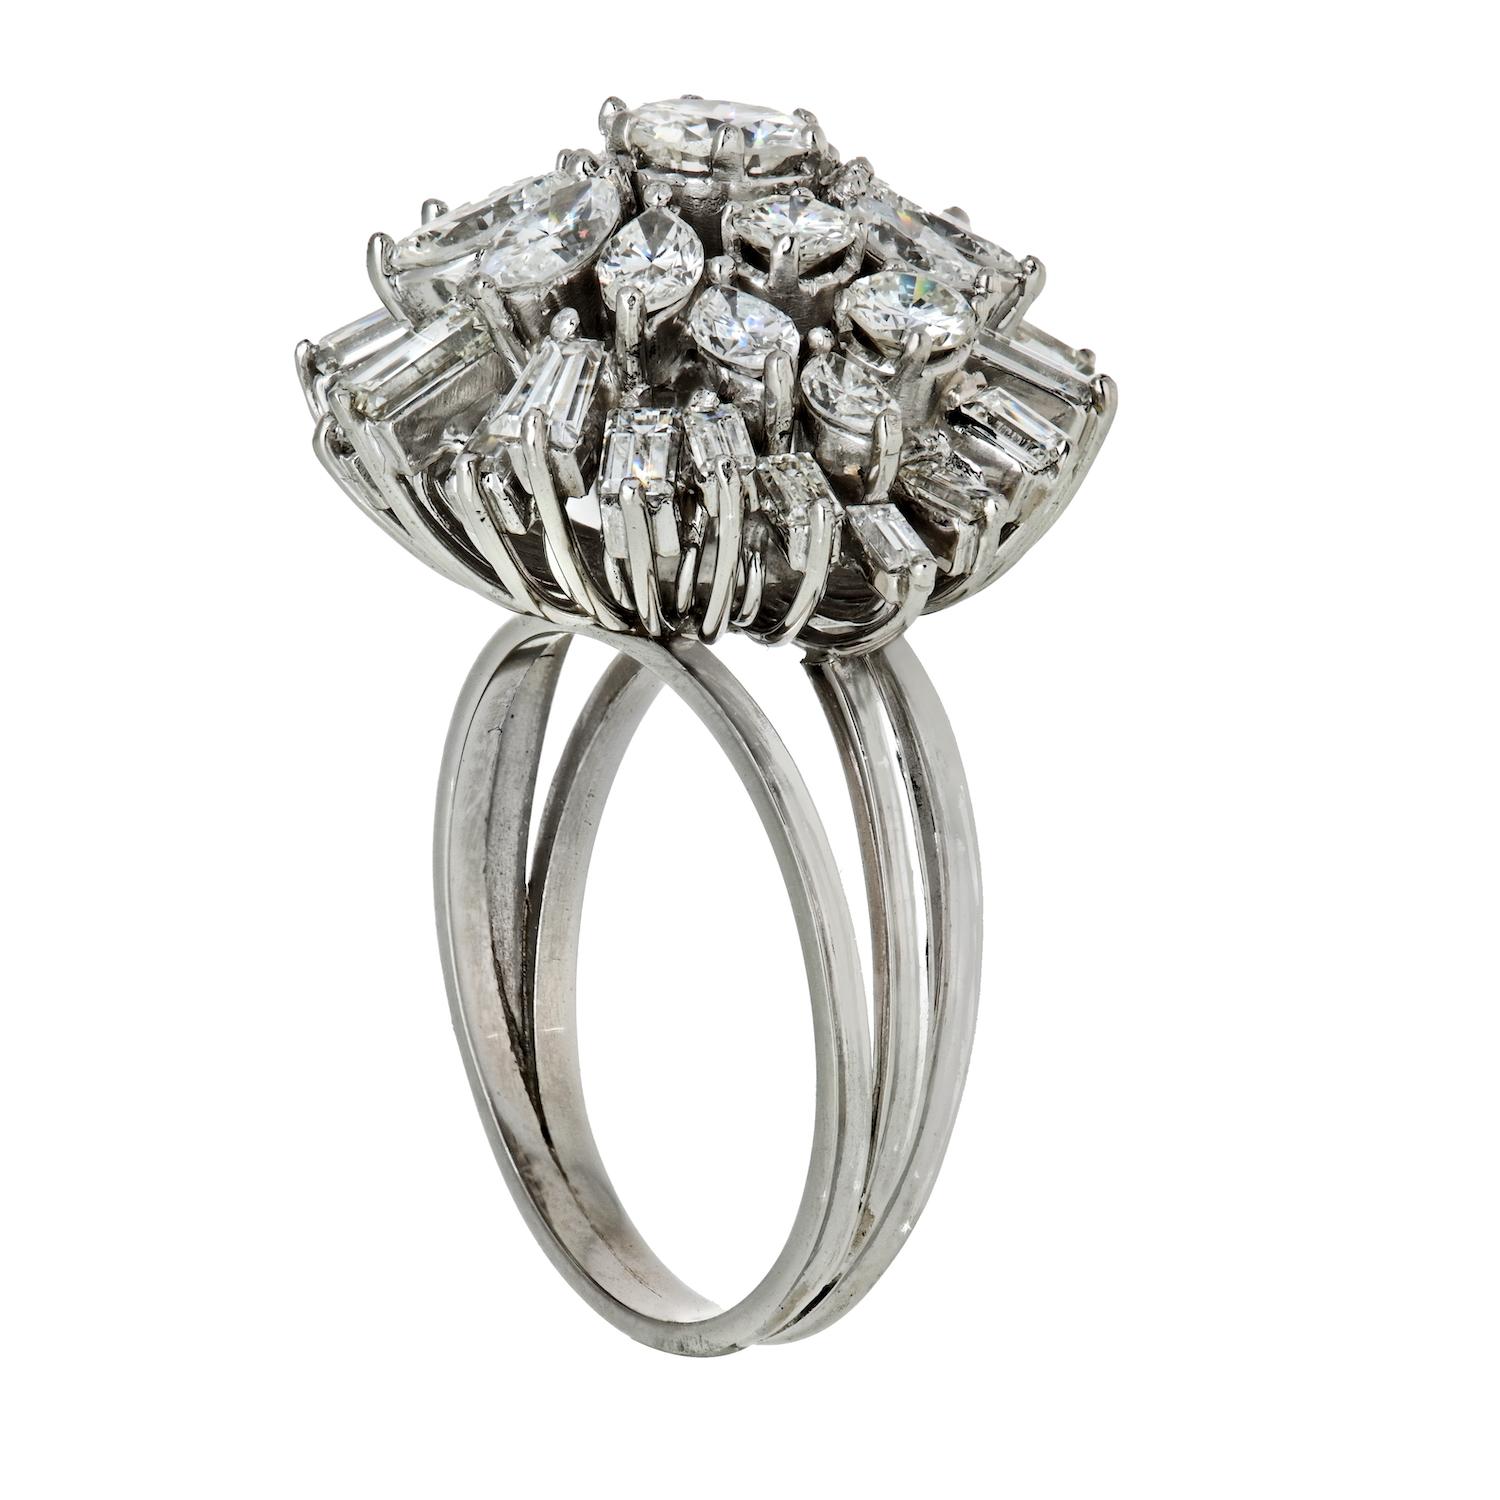 A fine and impressive vintage 5.75 carat and platinum cluster ring; part of our vintage jewelry and estate jewelry collections from 1960's.

This fine vintage diamond cluster ring has been crafted in platinum.

The pierced decorated boat style frame